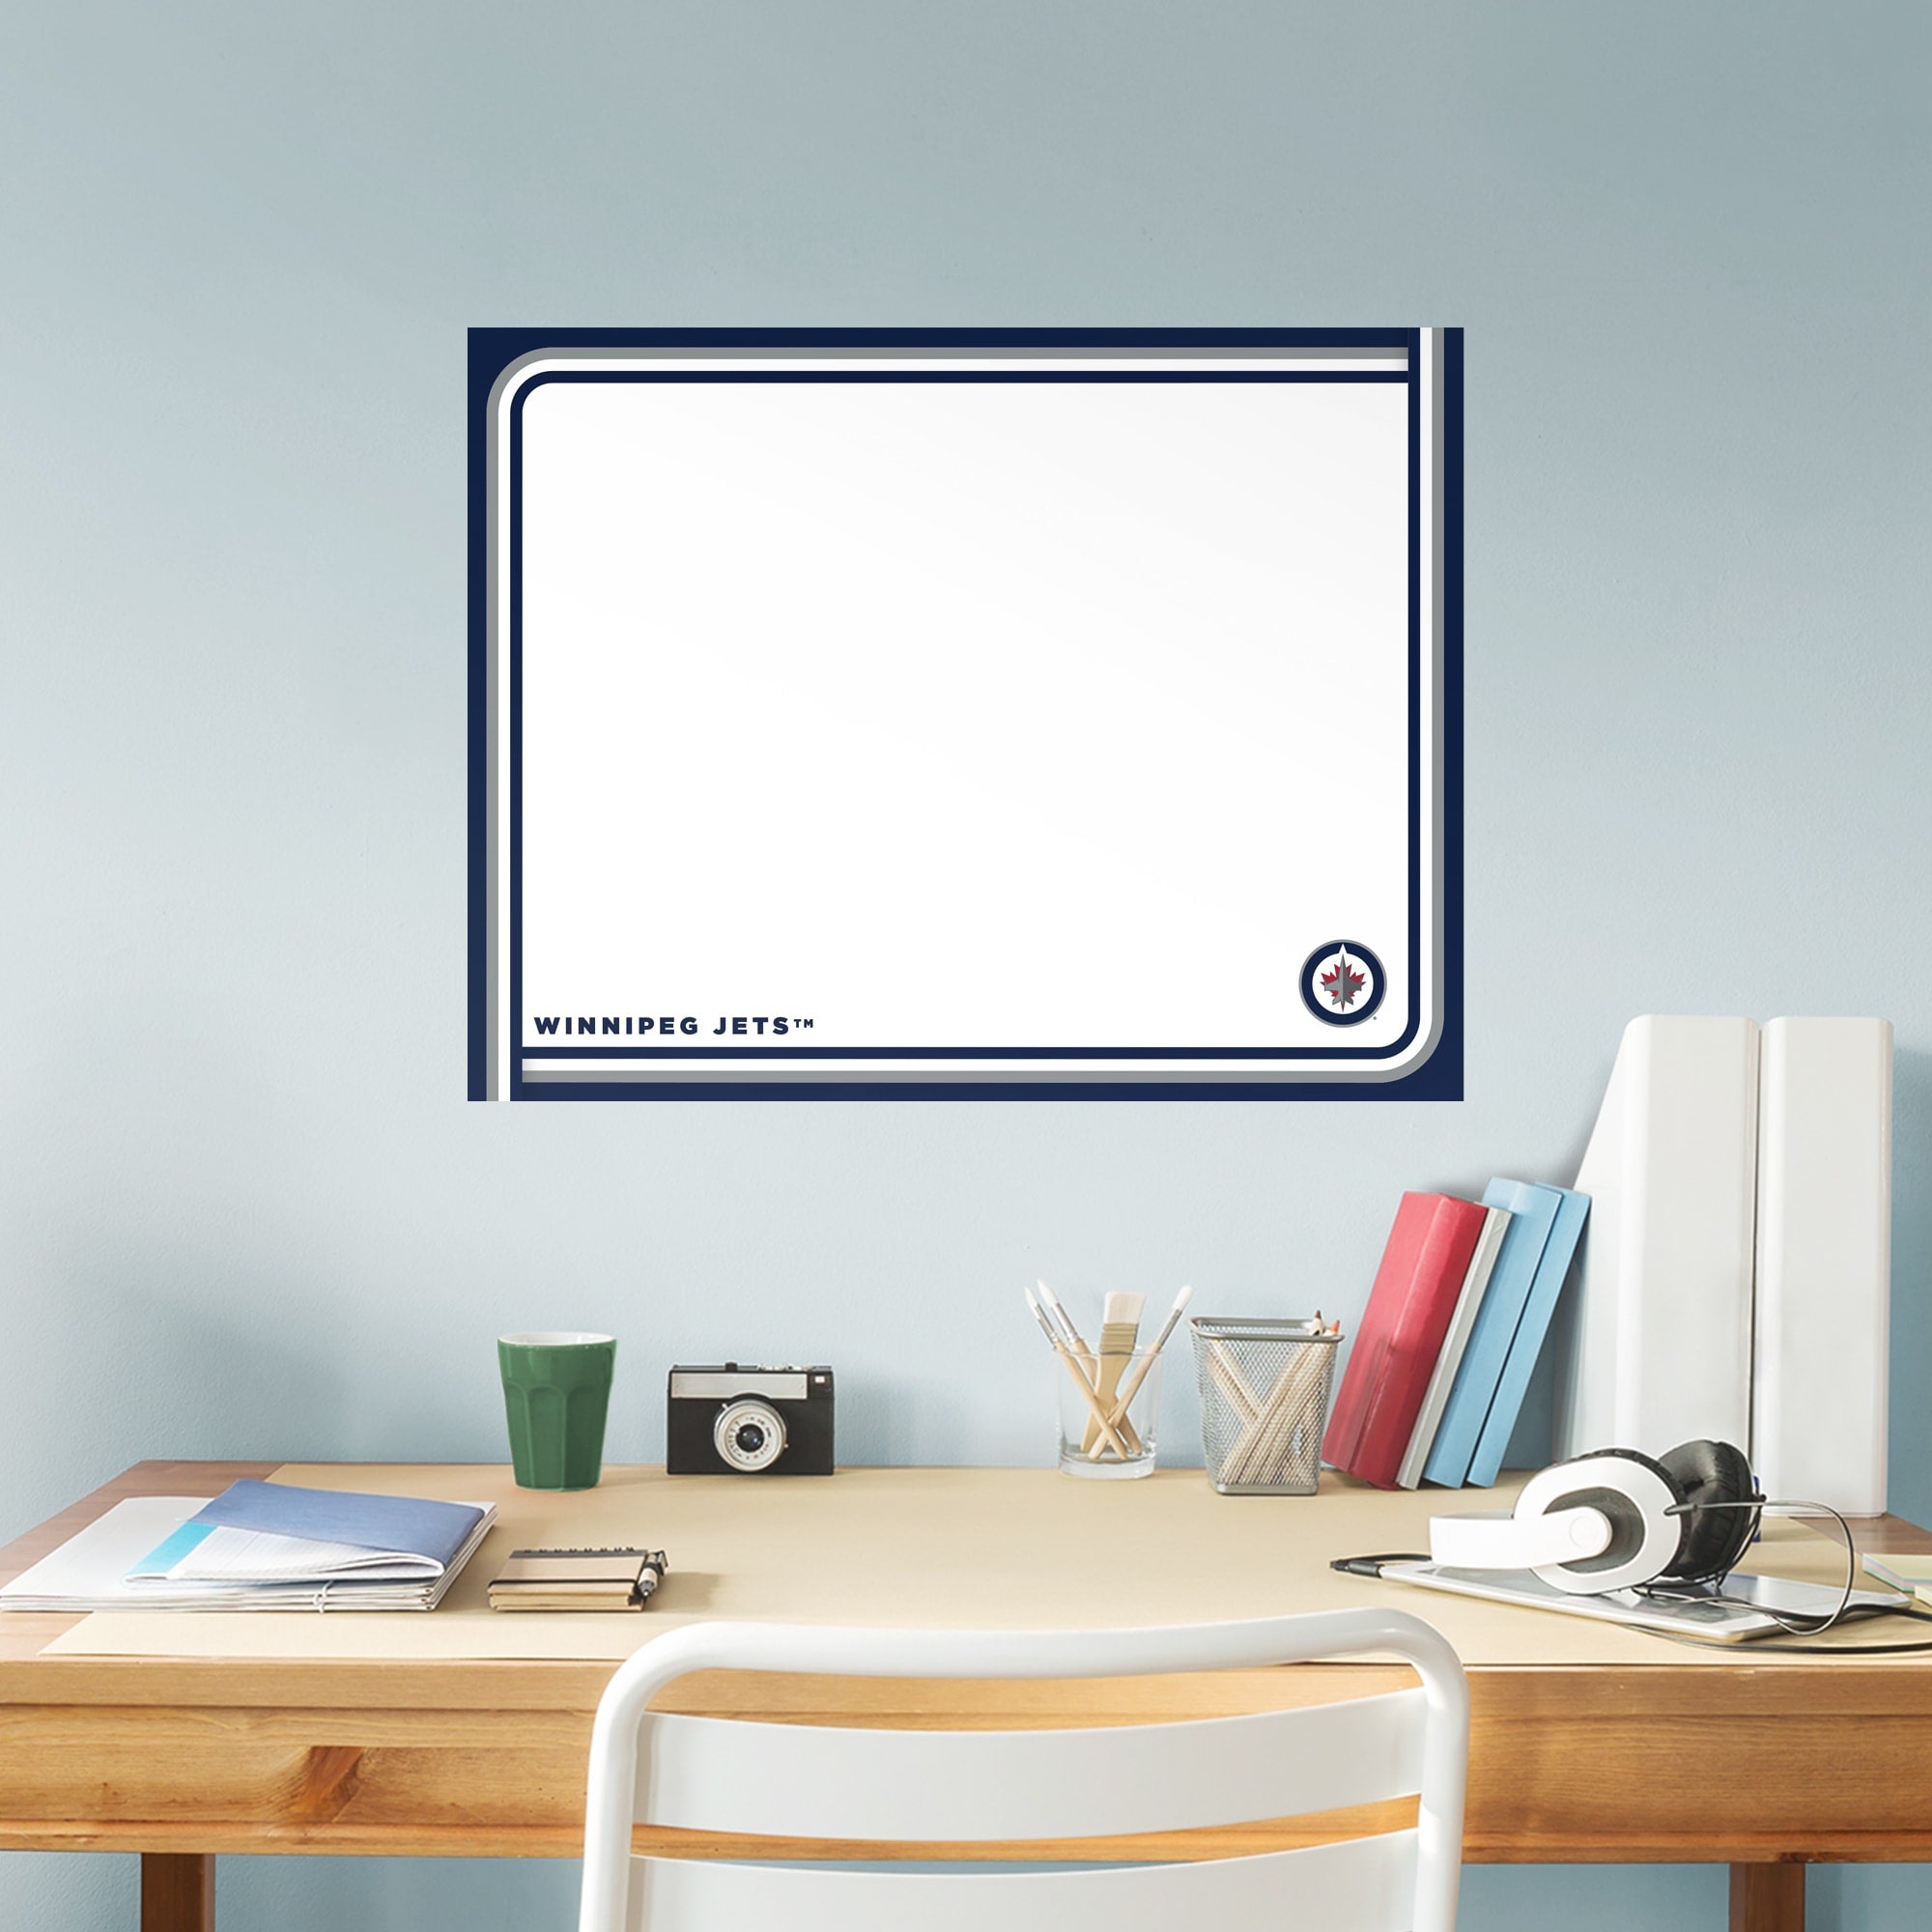 Winnipeg Jets: Dry Erase Whiteboard - X-Large Officially Licensed NHL Removable Wall Decal XL by Fathead | Vinyl